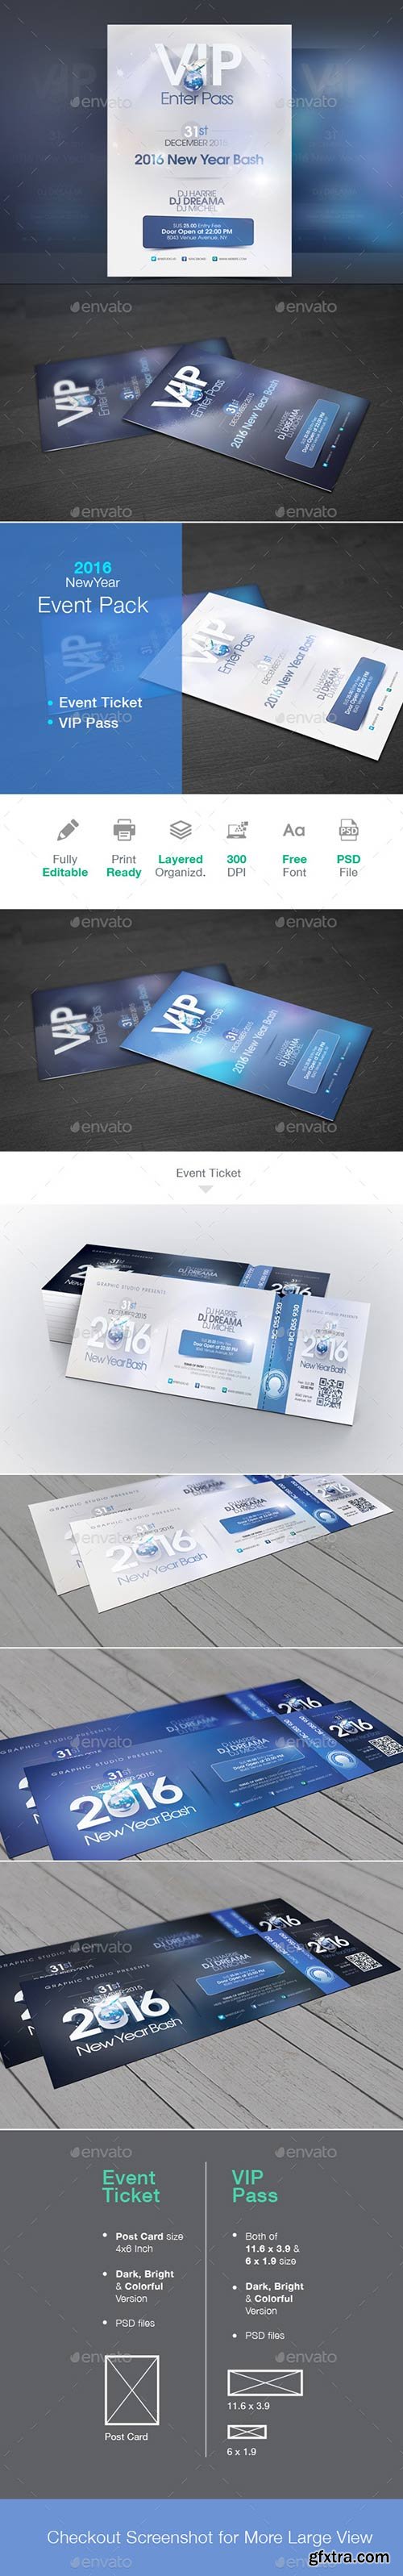 Graphicriver - New Year Event Ticket & VIP Pass 13548246